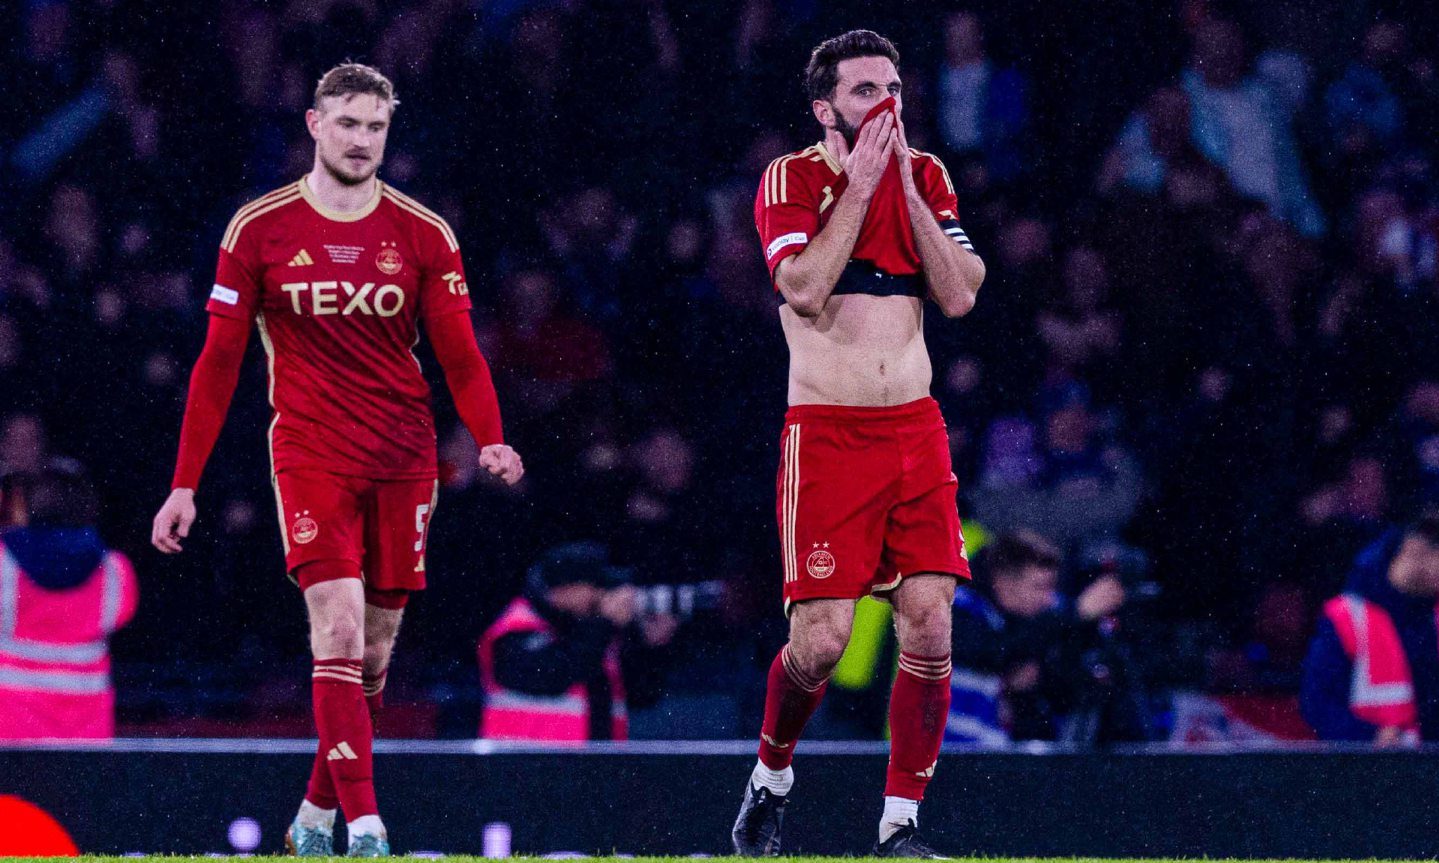 Aberdeen's Graeme Shinnie and Richard Jensen look dejected on the pitch, Shinnie has brought his shirt up to cover his face